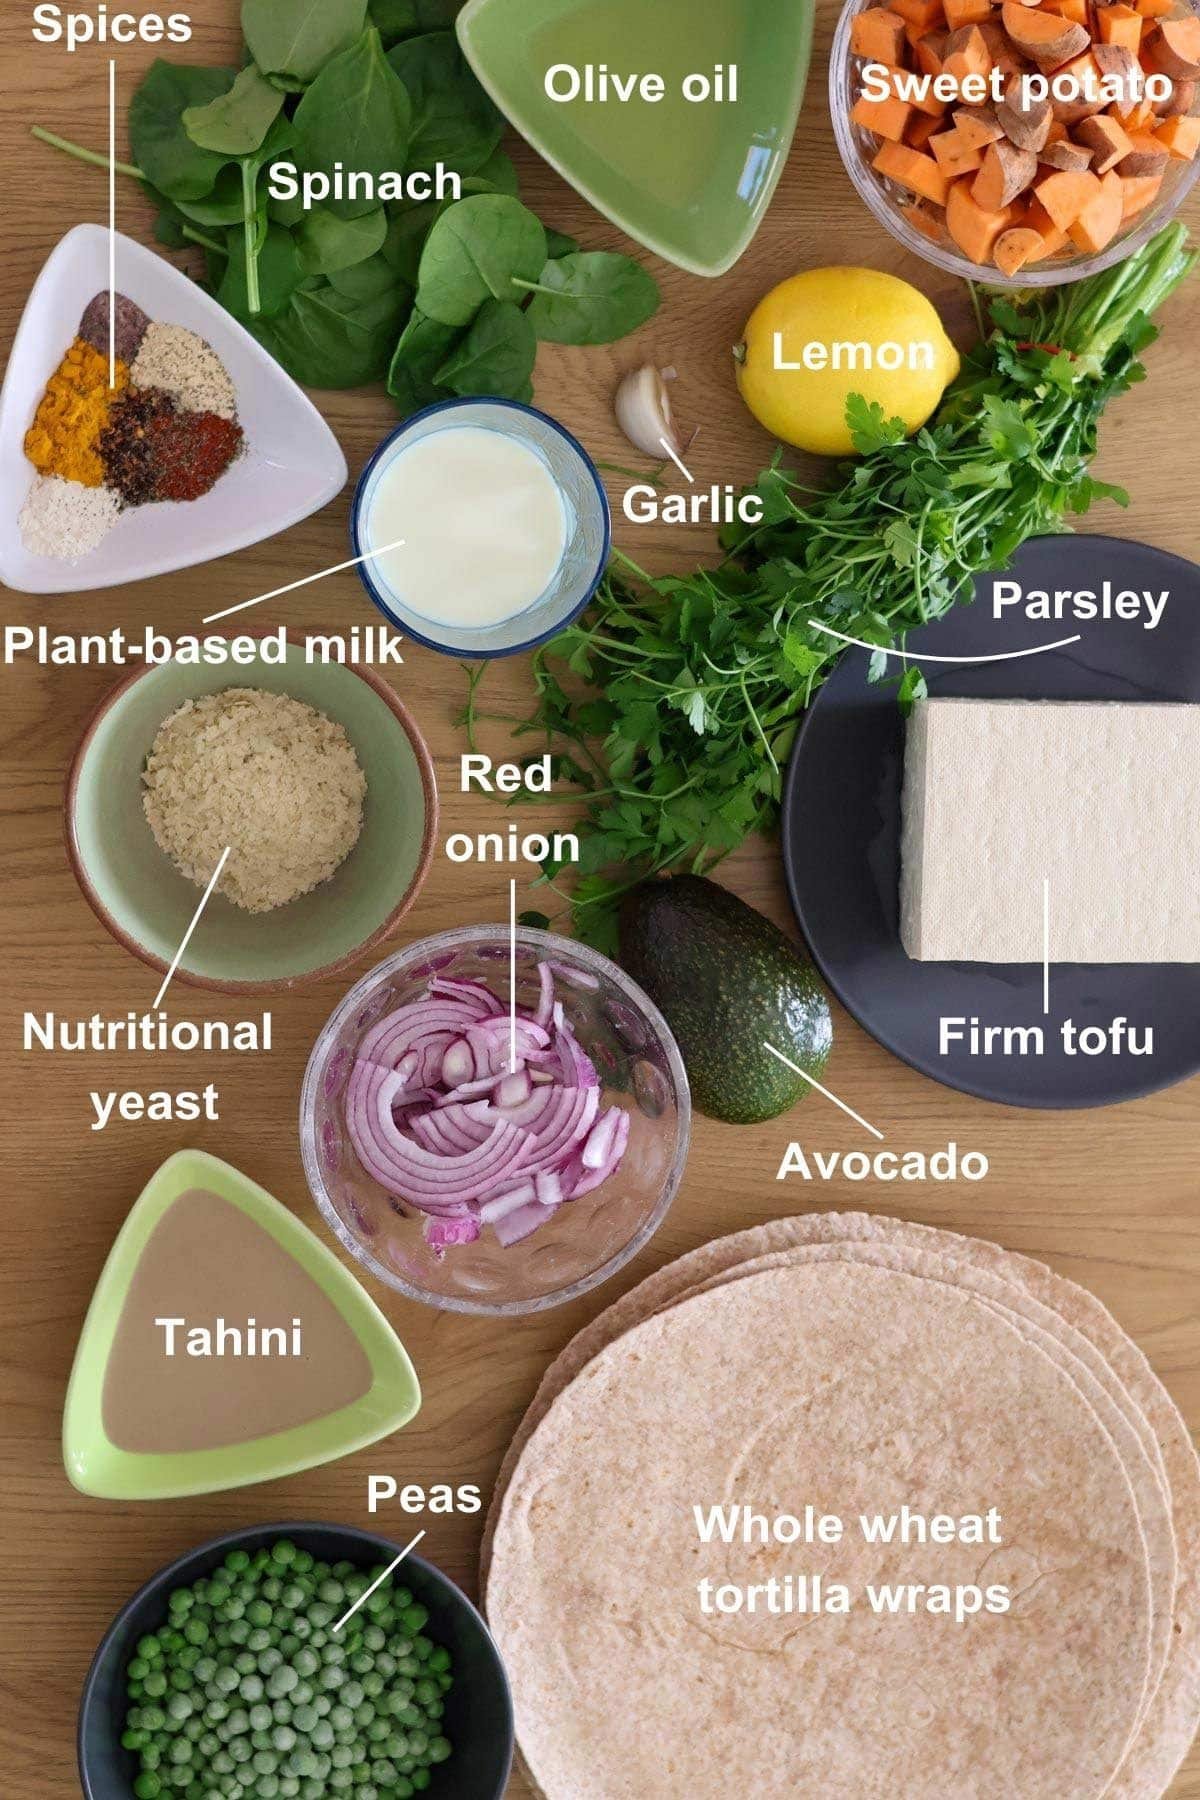 All the ingredients for the recipe in a wooden table.